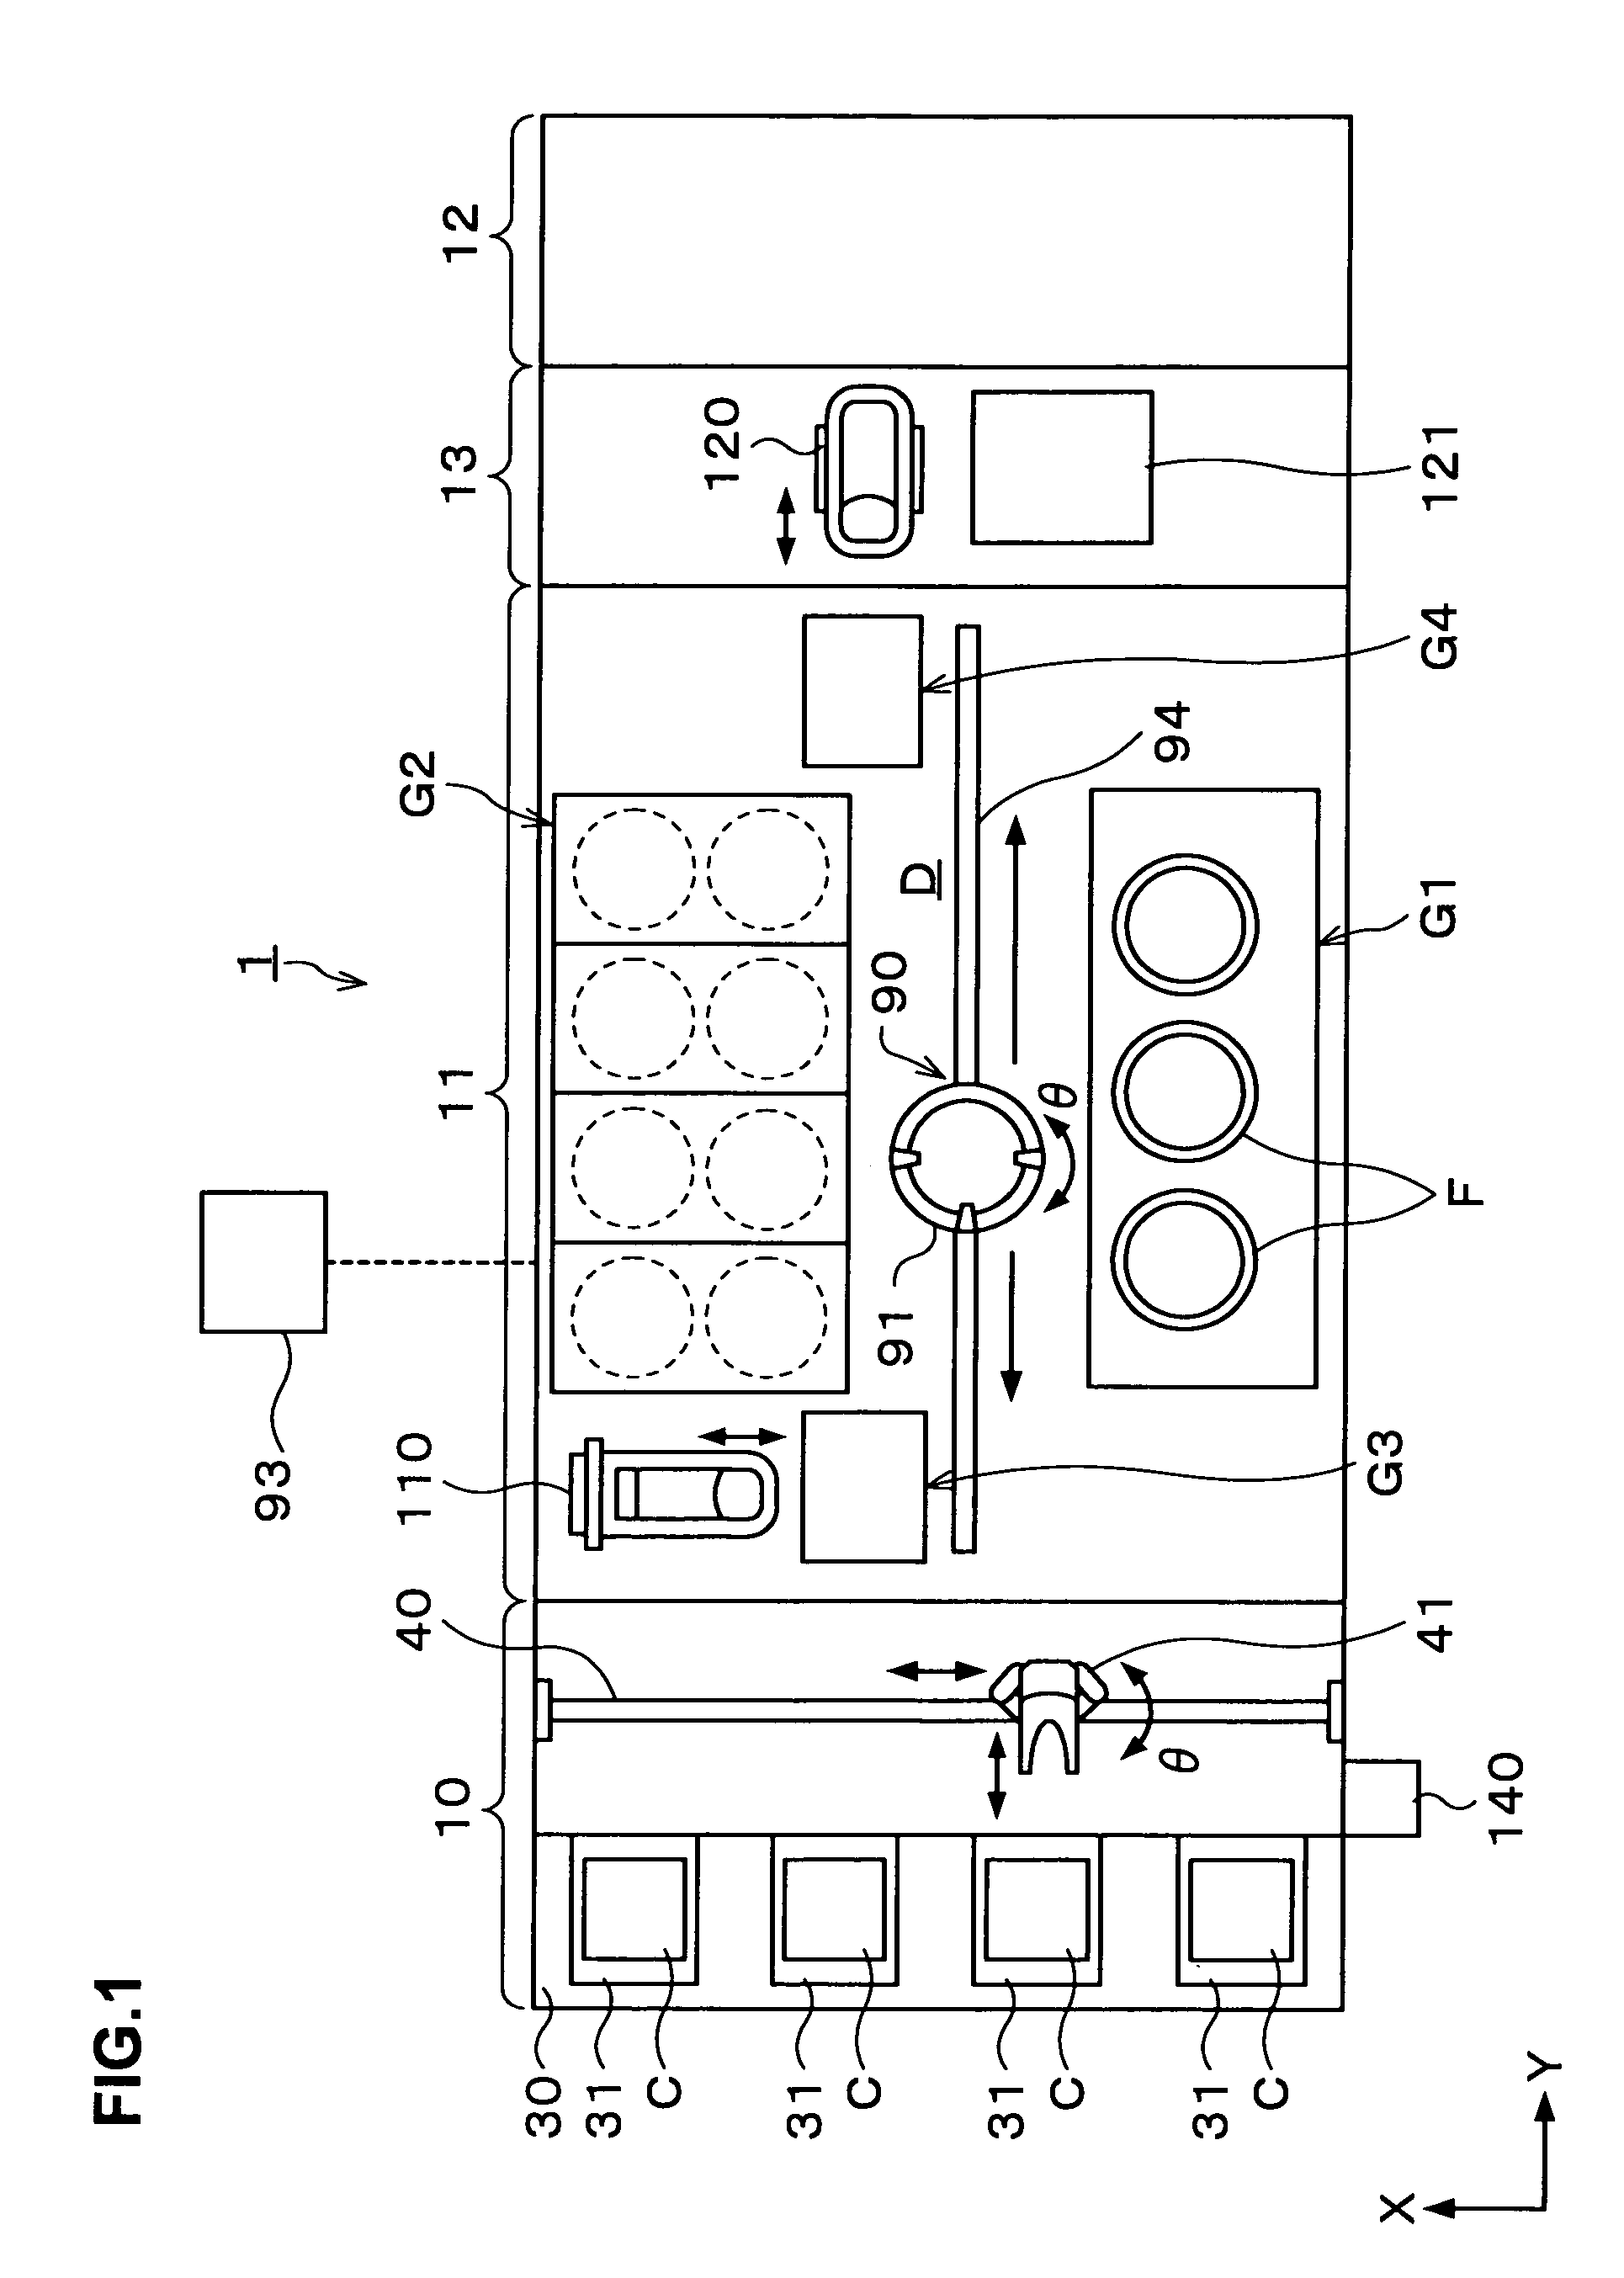 Substrate transfer apparatus and substrate treatment system